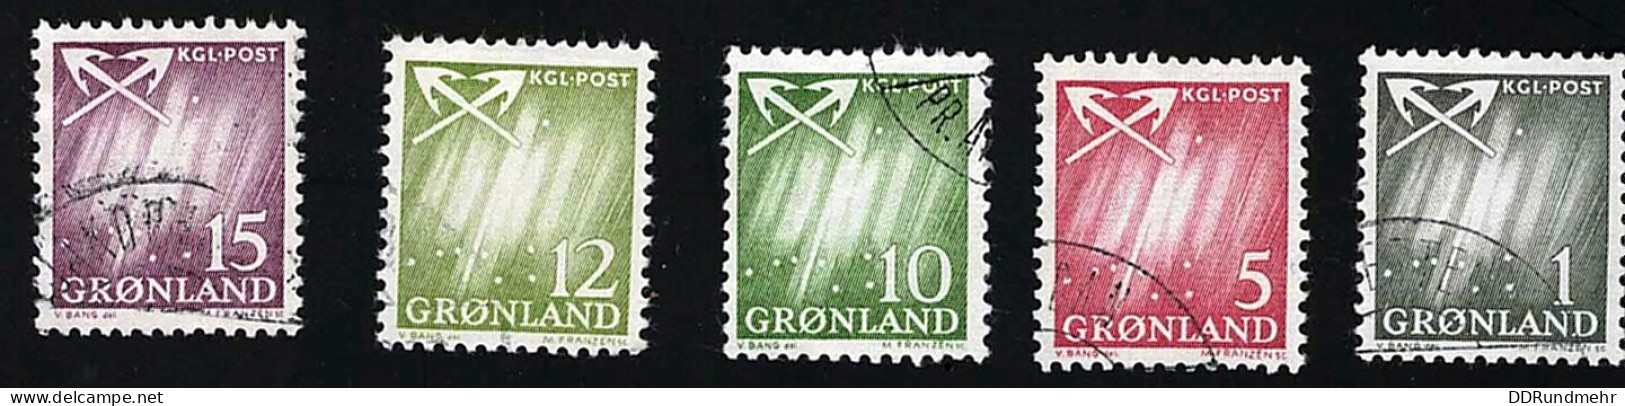 1963 Northern Light Michel GL 47 - 51 Stamp Number GL 48 - 52 Yvert Et Tellier GL 36 - 40 Used - Used Stamps